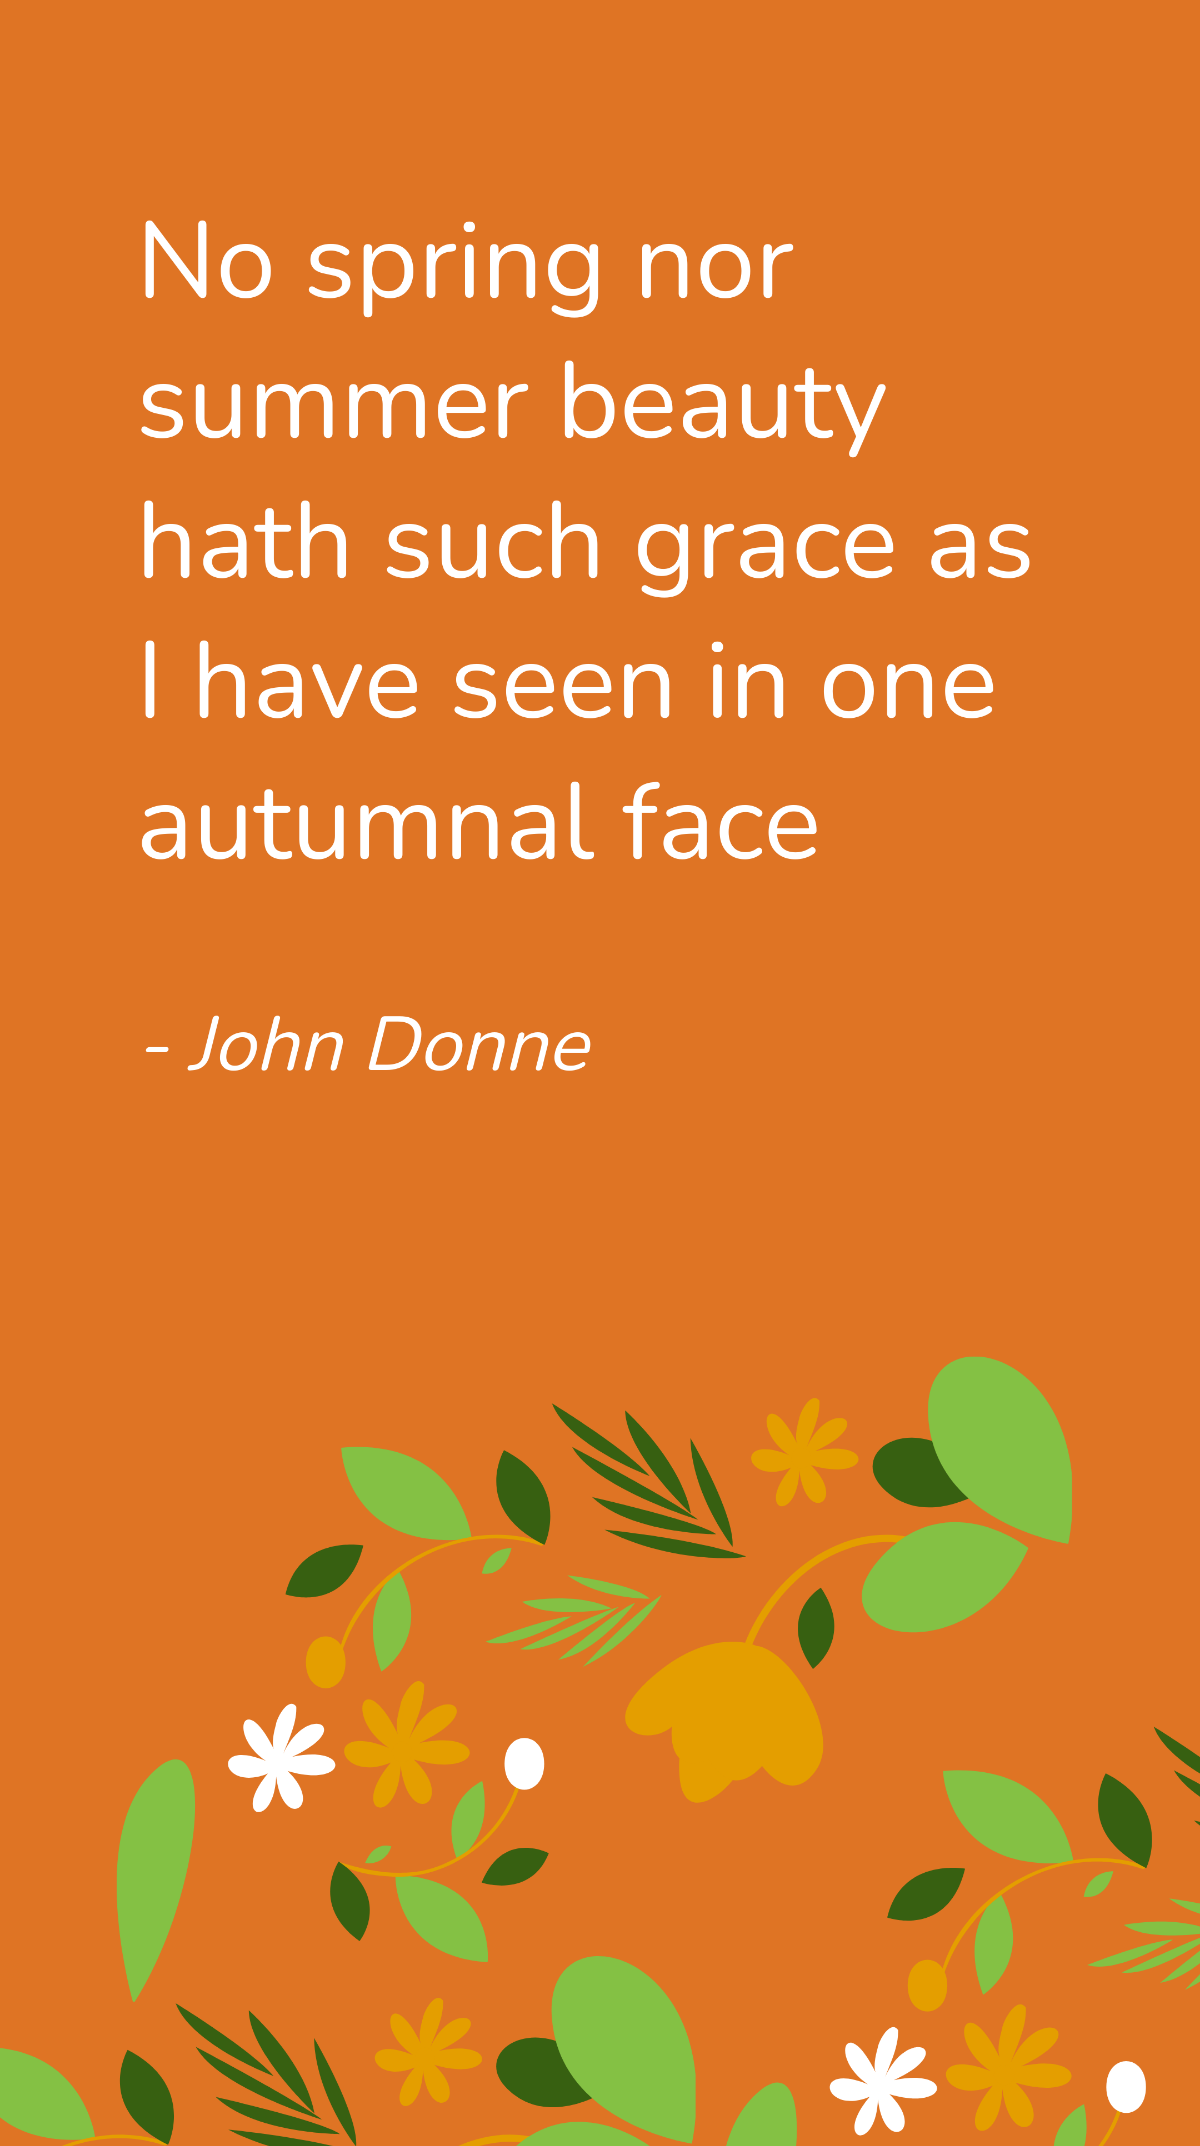 Free John Donne - No spring nor summer beauty hath such grace as I have seen in one autumnal face Template